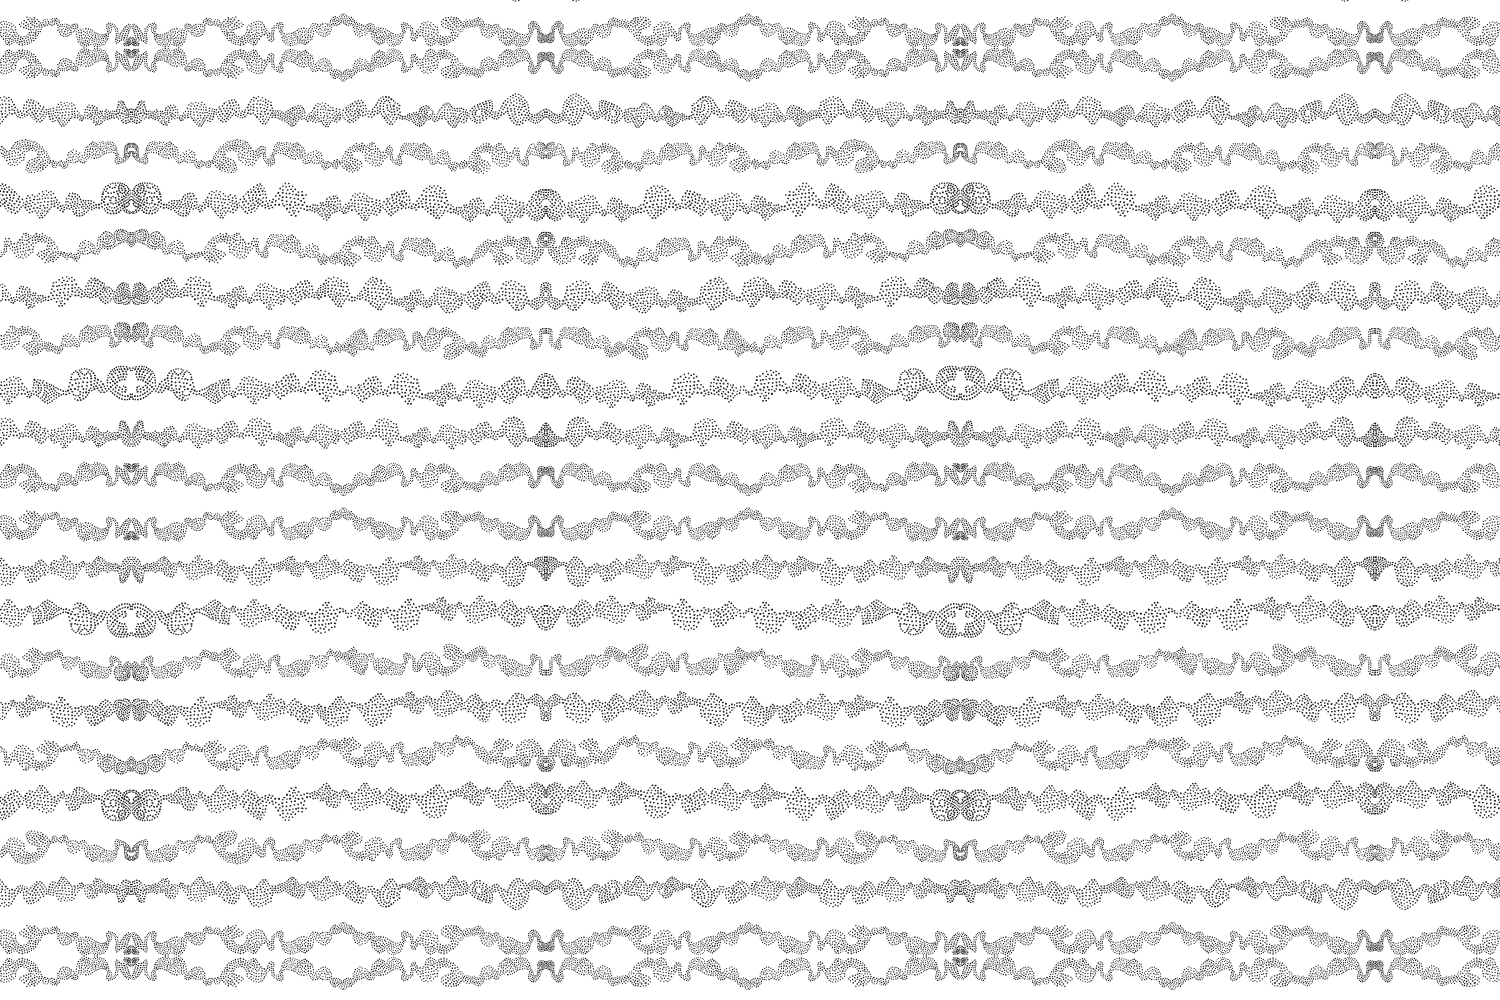 Small_Ornate_Dot_Lines_1500px_x_1000px-01.png